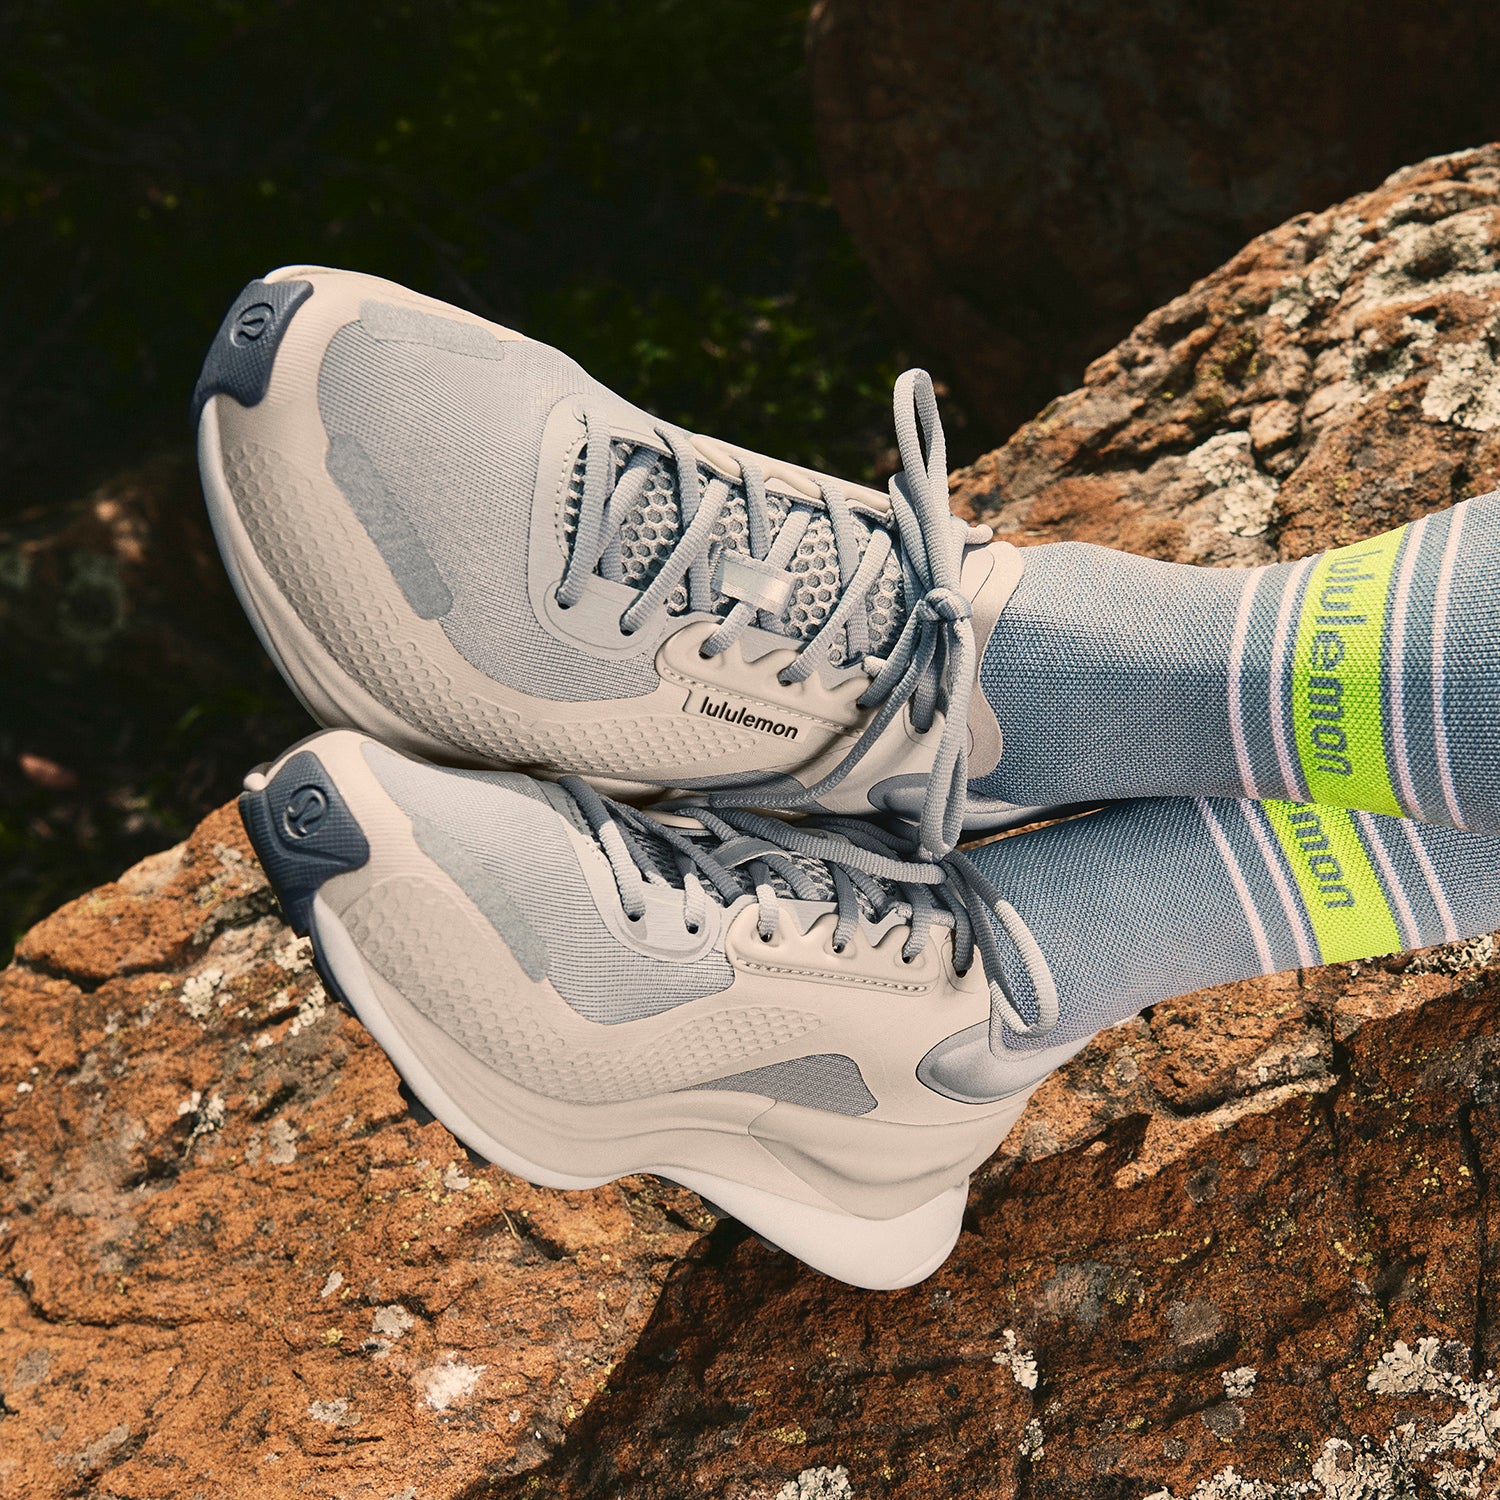 The newest lululemon shoe is here: Shop the Blissfeel Trail